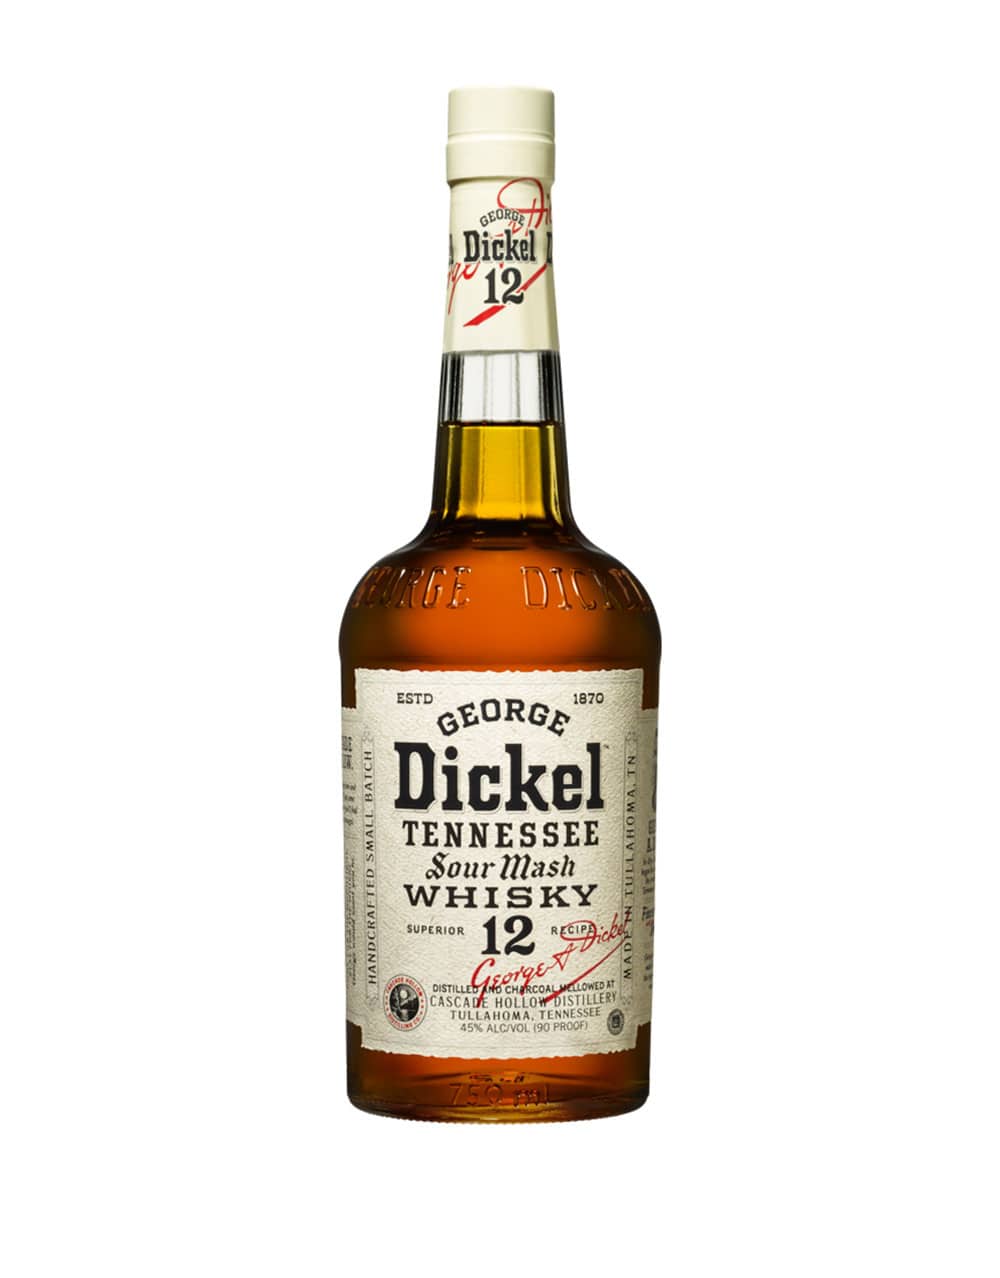 George Dickel 12 Tennessee Sour Mash Whisky